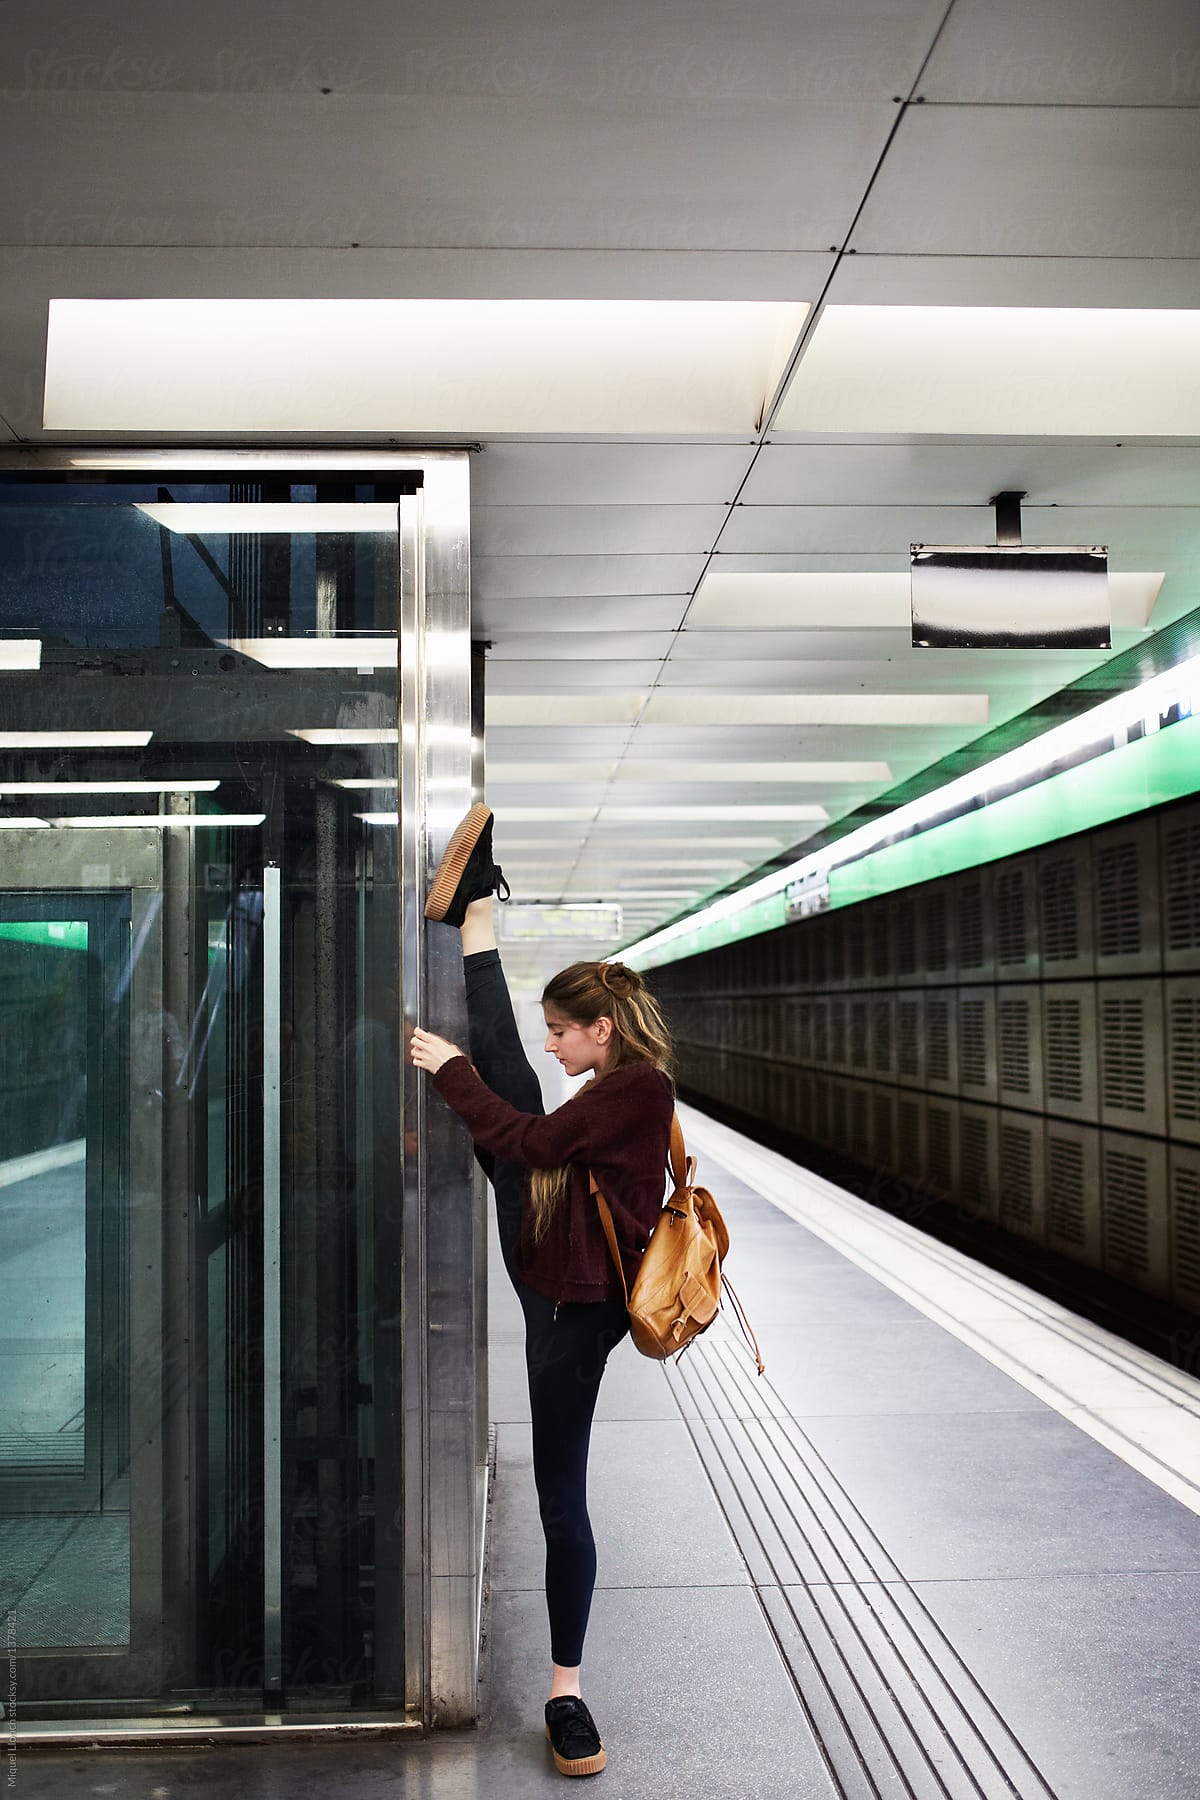 Young woman doing stretch exercises on the subway platform